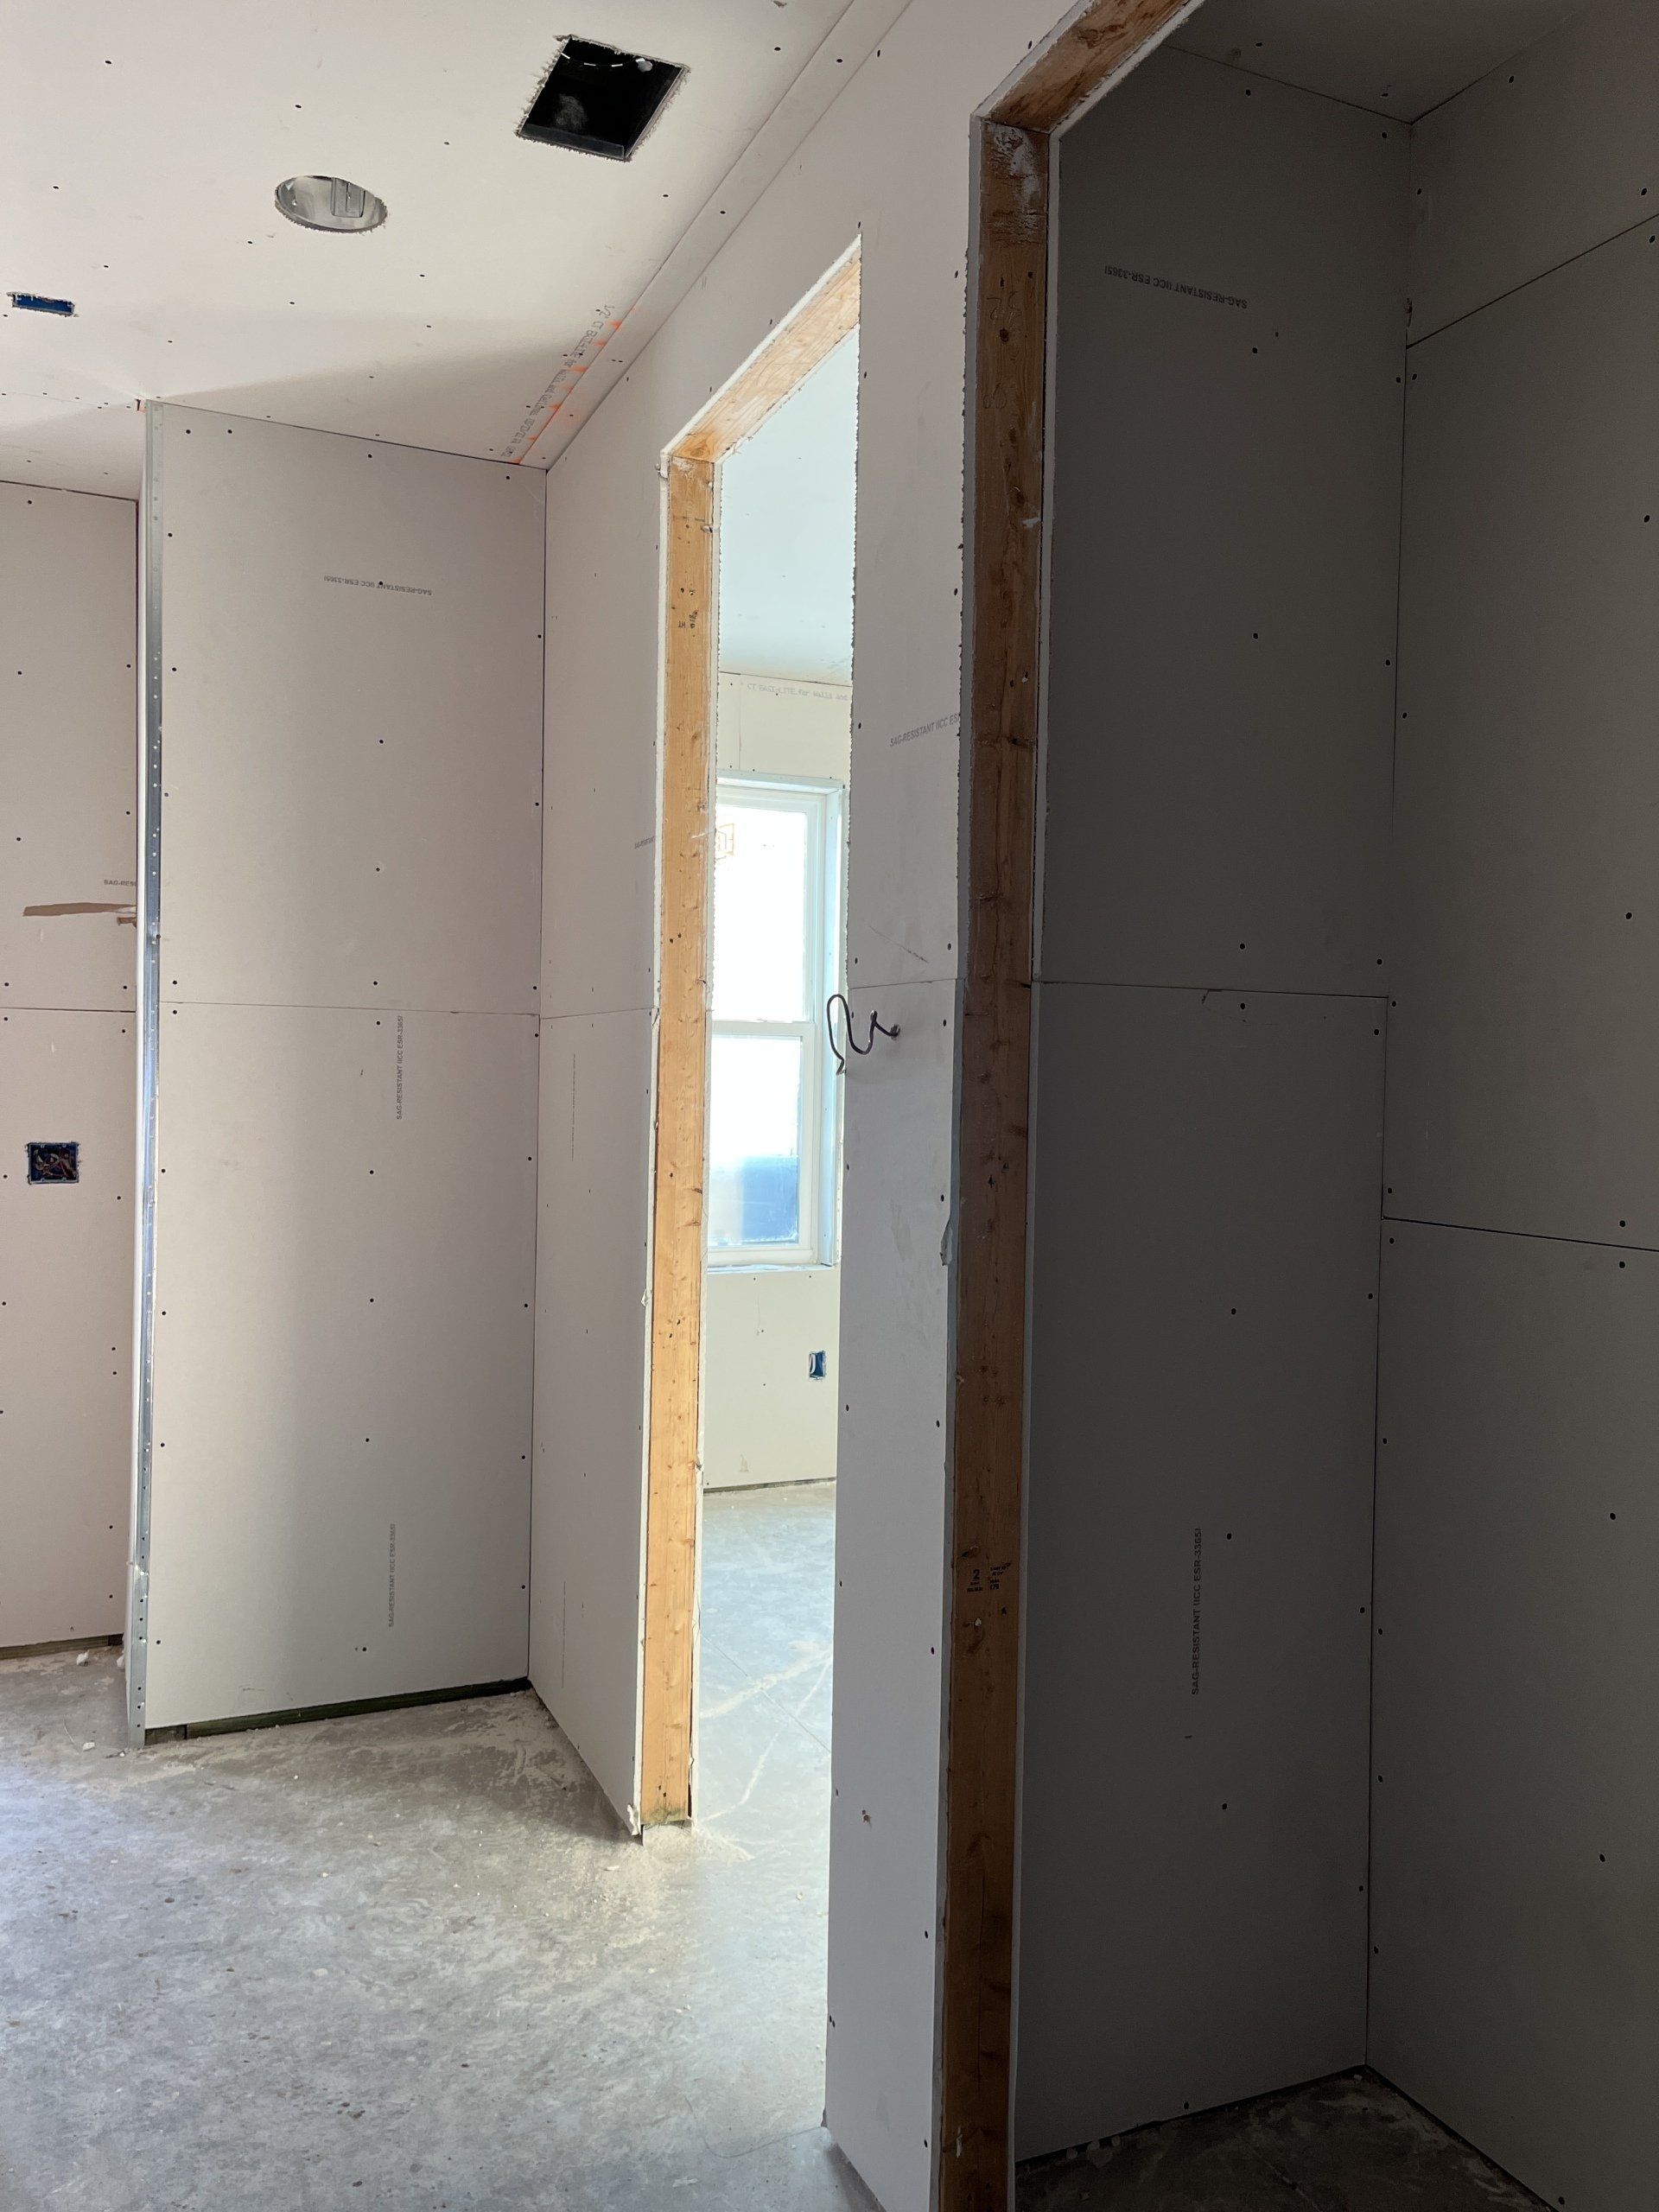 inside Tampa townhome, drywall has been hung but not finished or painted